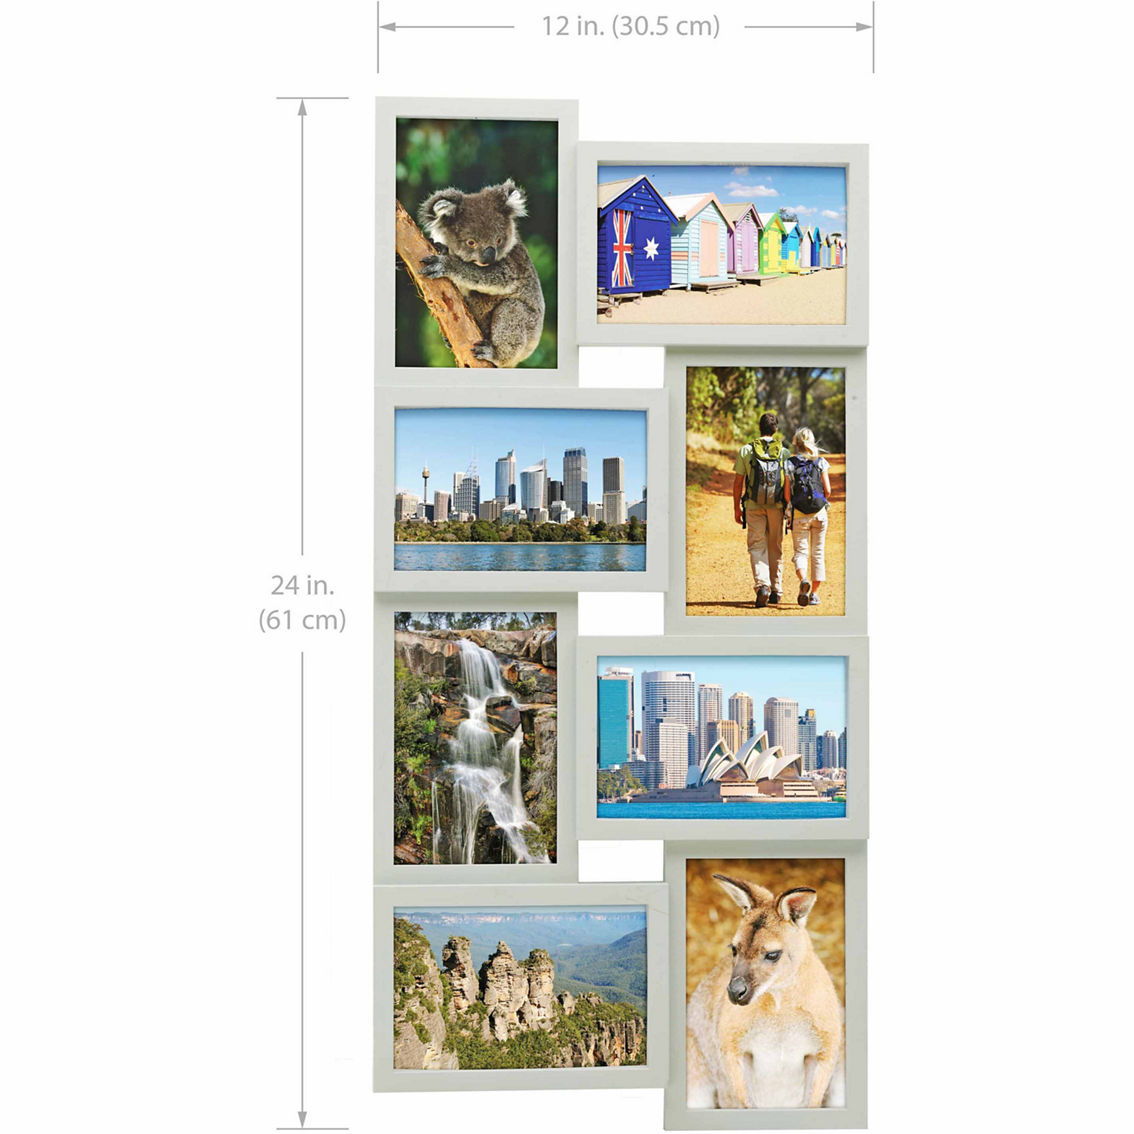 Melannco 18 x 23 in. Gray 8 Opening Photo Collage Frame - Image 2 of 2